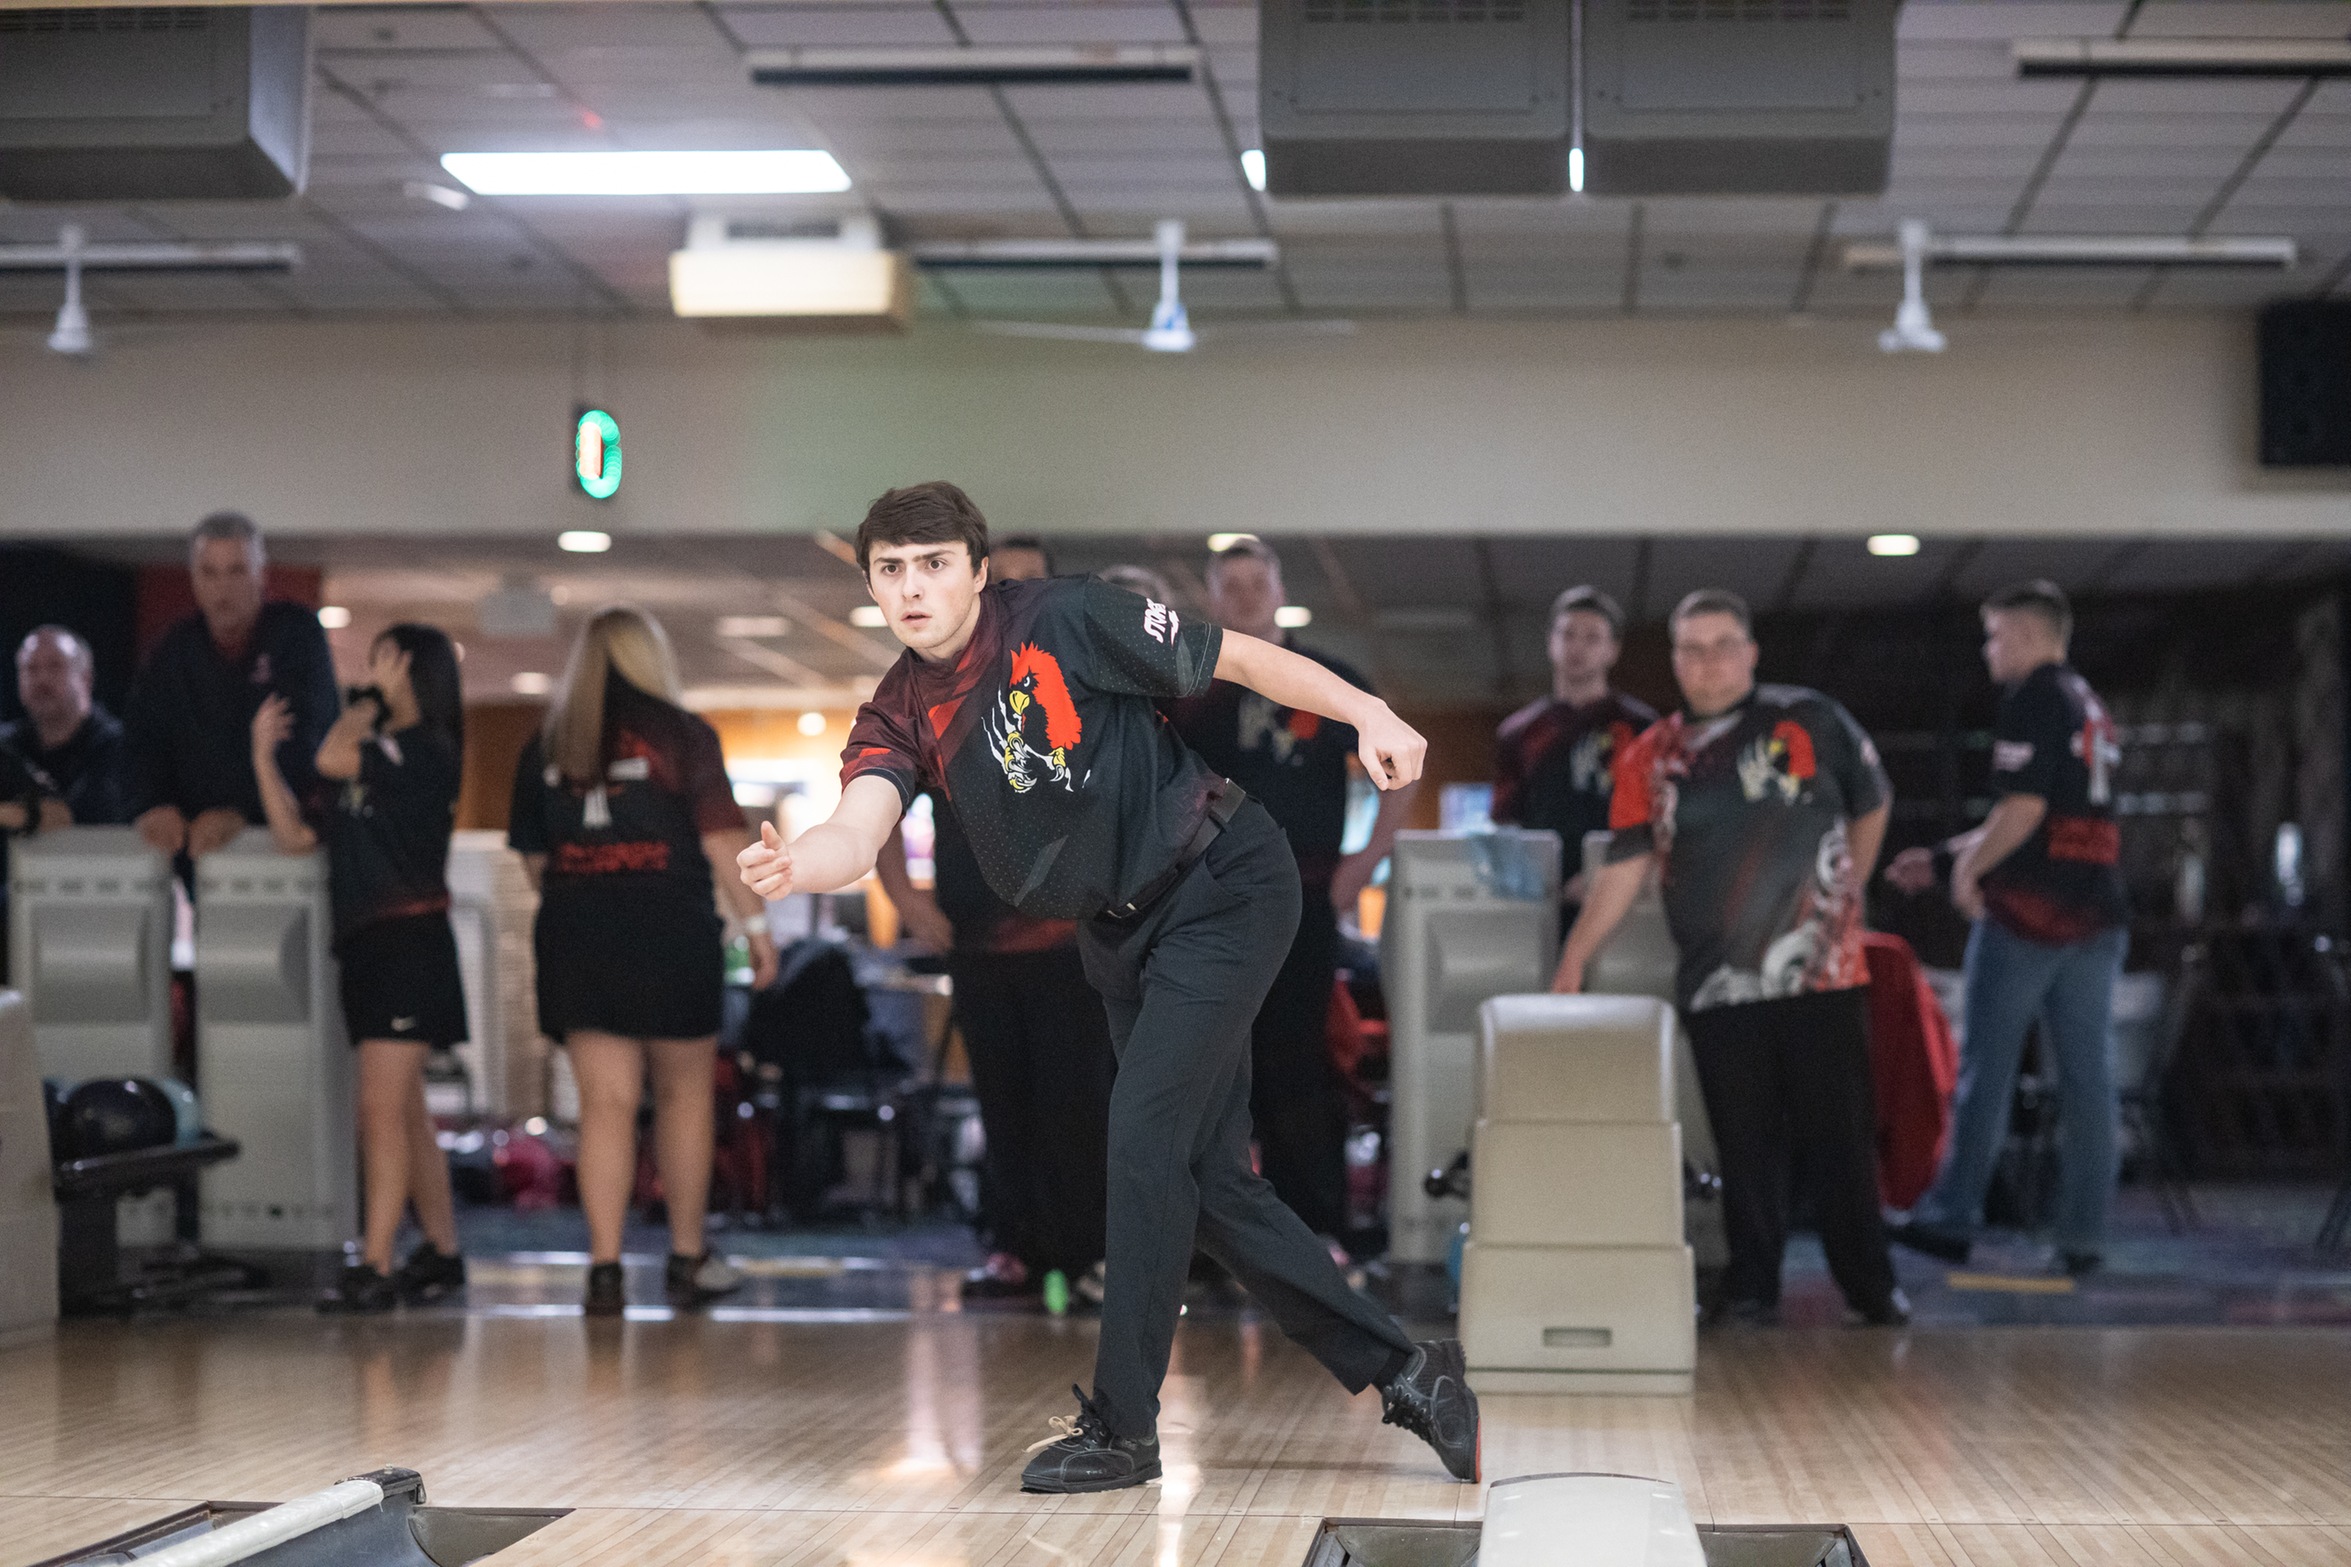 Gossman and Men’s Bowling each finish in third place at first WHAC Jamboree